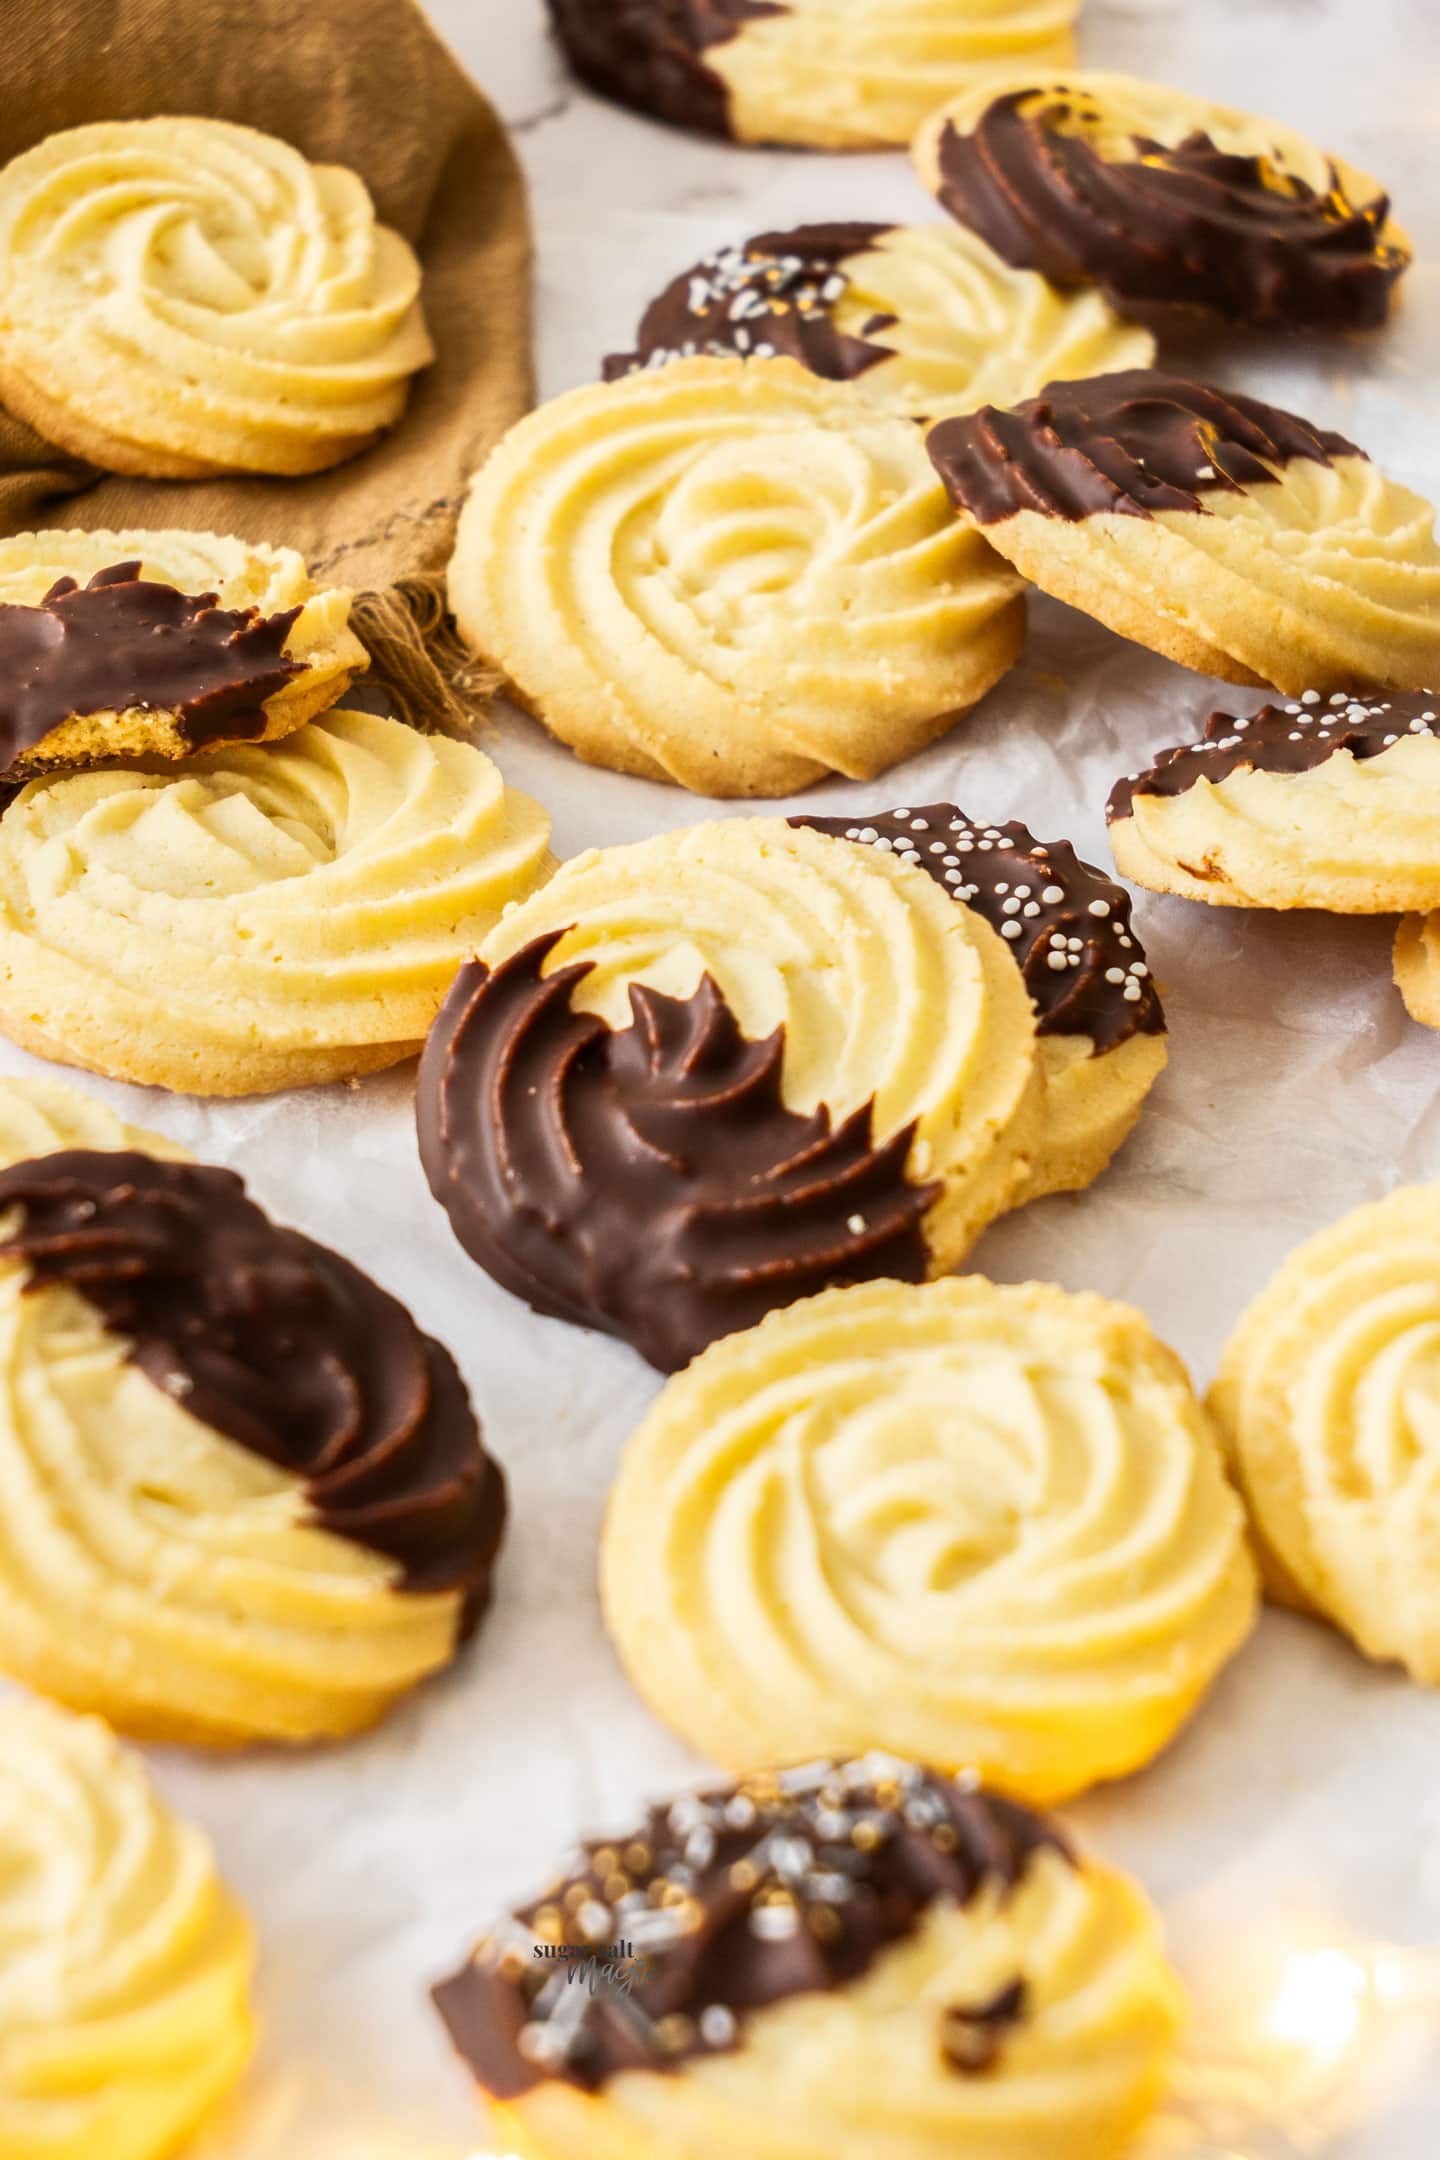 A whole batch of Danish butter cookies, some with a chocolate coating.